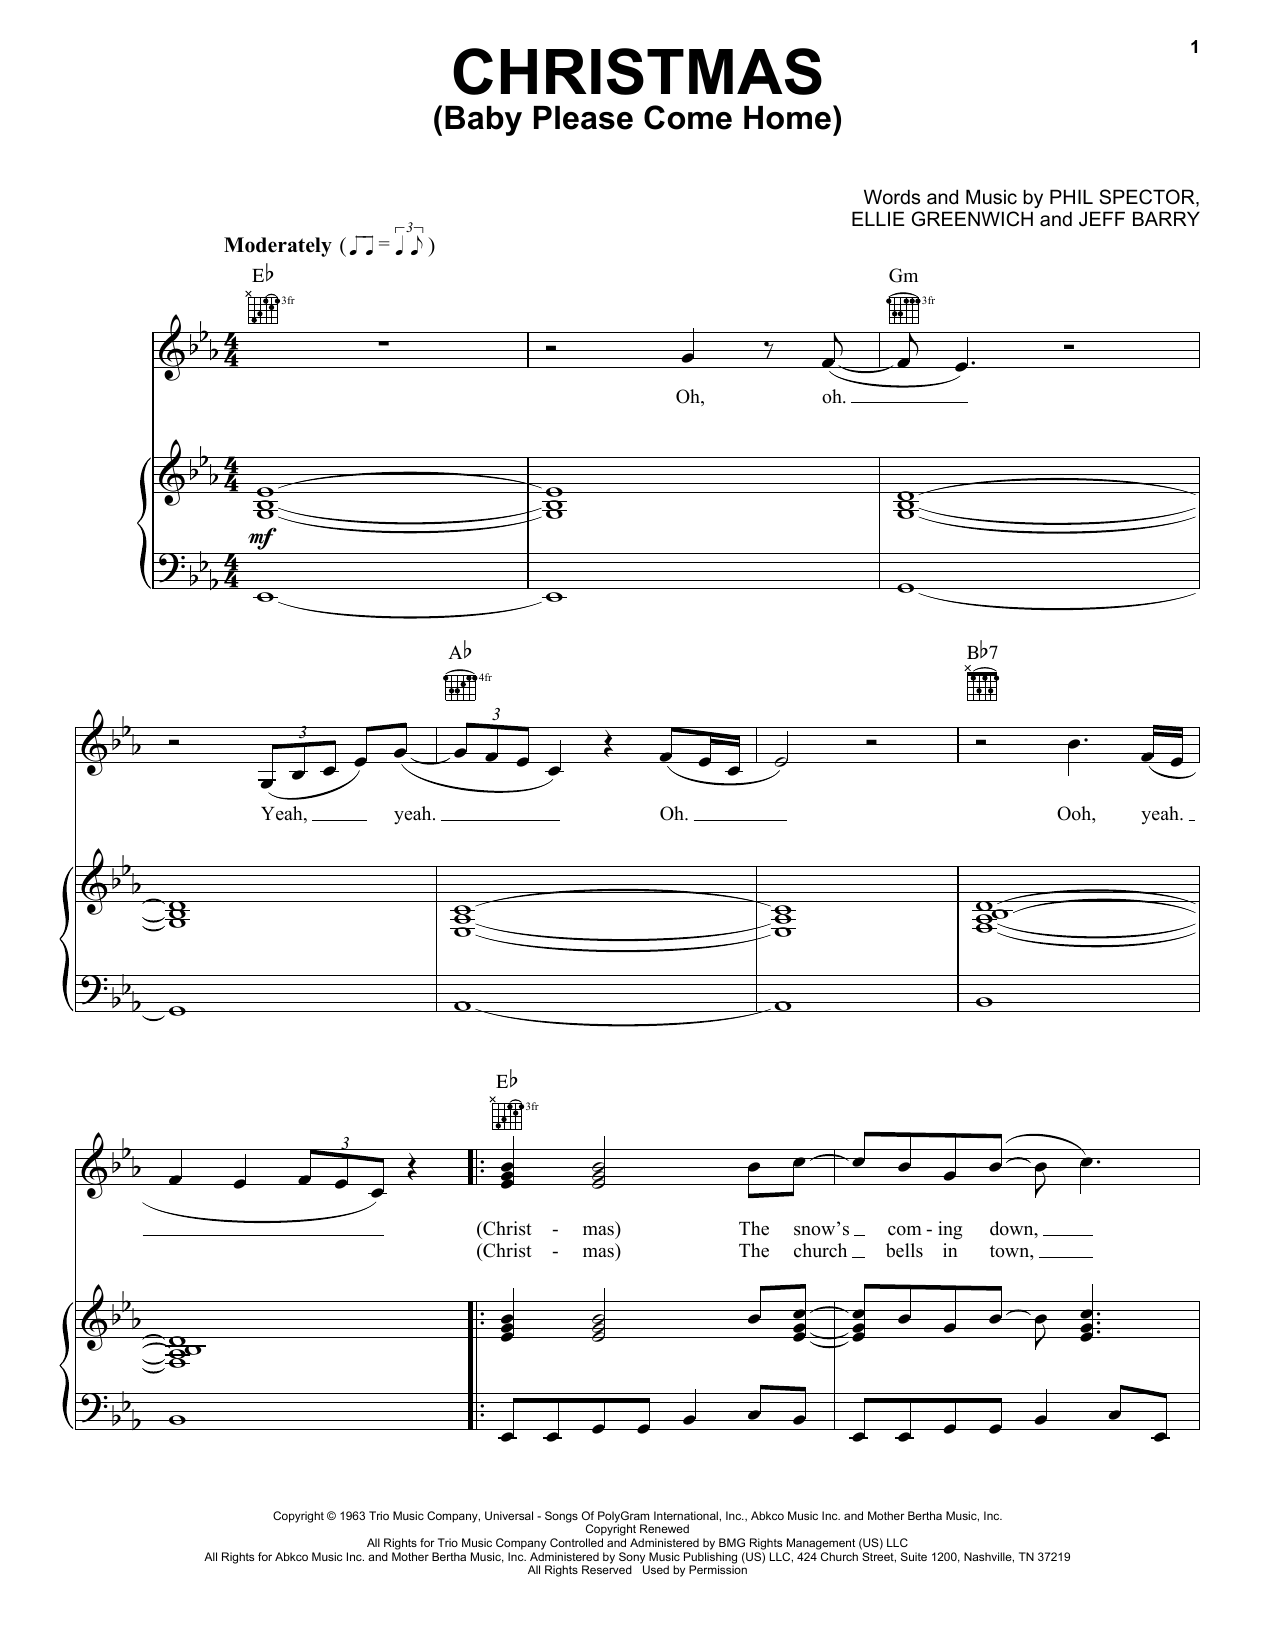 Mariah Carey Christmas (Baby Please Come Home) sheet music notes and chords. Download Printable PDF.